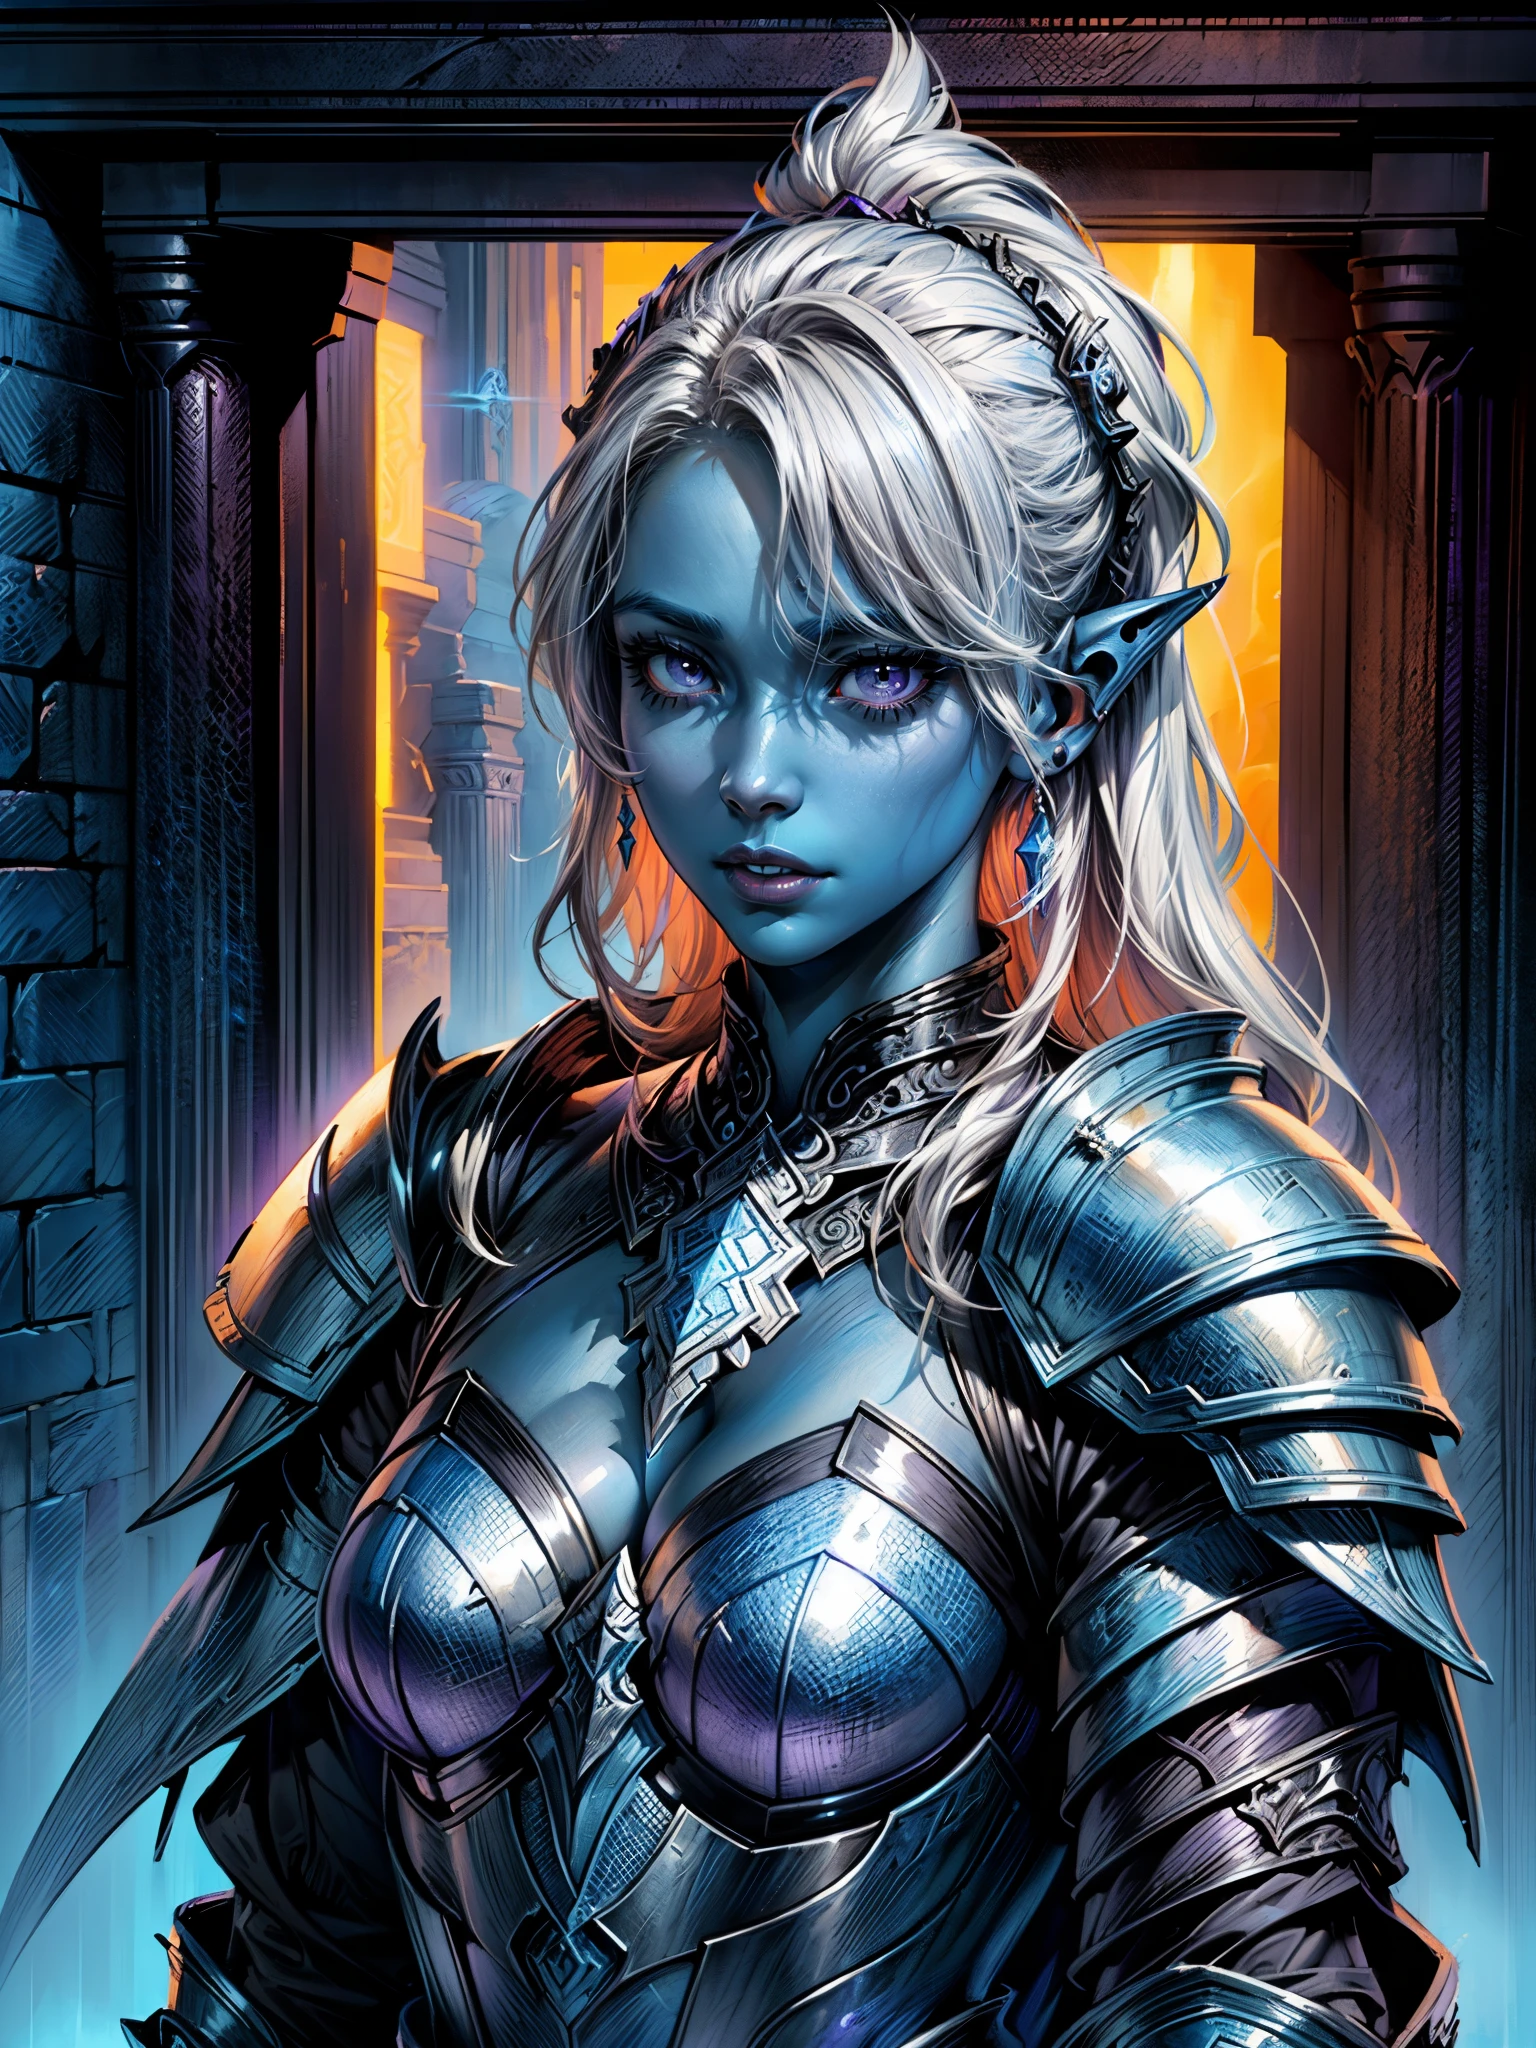 fAntAsy Art, dnd Art, RPG Art, 广角镜头, (mAsterpiece: 1.4) A (portrAit: 1.3) intense detAils, highly detAiled, photoreAlistic, best quAlity, 高分辨率, portrAit A femAle (fAntAsy Art, MAsterpiece, best quAlity: 1.3) ((蓝色的 skin: 1.5)), intense detAils fAciAl detAils, exquisite beAuty, (fAntAsy Art, MAsterpiece, best quAlity) 牧师, (蓝色的: 1.3) skinned femAle, (白色的 hAir: 1.4), long hAir, (hAir hides eArs: 1.5), (紫色的眼睛: 1.3), Action shot fAntAsy Art, MAsterpiece, best quAlity) Armed A fiery sword red fire, weAring heAvy (白色的: 1.3) hAlf plAte mAil Armor, weAring high heeled lAced boots, weAring An(orAnge :1.3) cloAk, weAring glowing holy symbol GlowingRunes_黄色的, within fAntAsy temple bAckground, 反射光, high detAils, best quAlity, 16千, [ultrA detAiled], mAsterpiece, best quAlity, (extremely detAiled), 特写, ultrA 广角镜头, photoreAlistic, 生的, fAntAsy Art, dnd Art, fAntAsy Art, reAlistic Art,((best quAlity)), ((mAsterpiece)), (detAiled), perfect fAce,